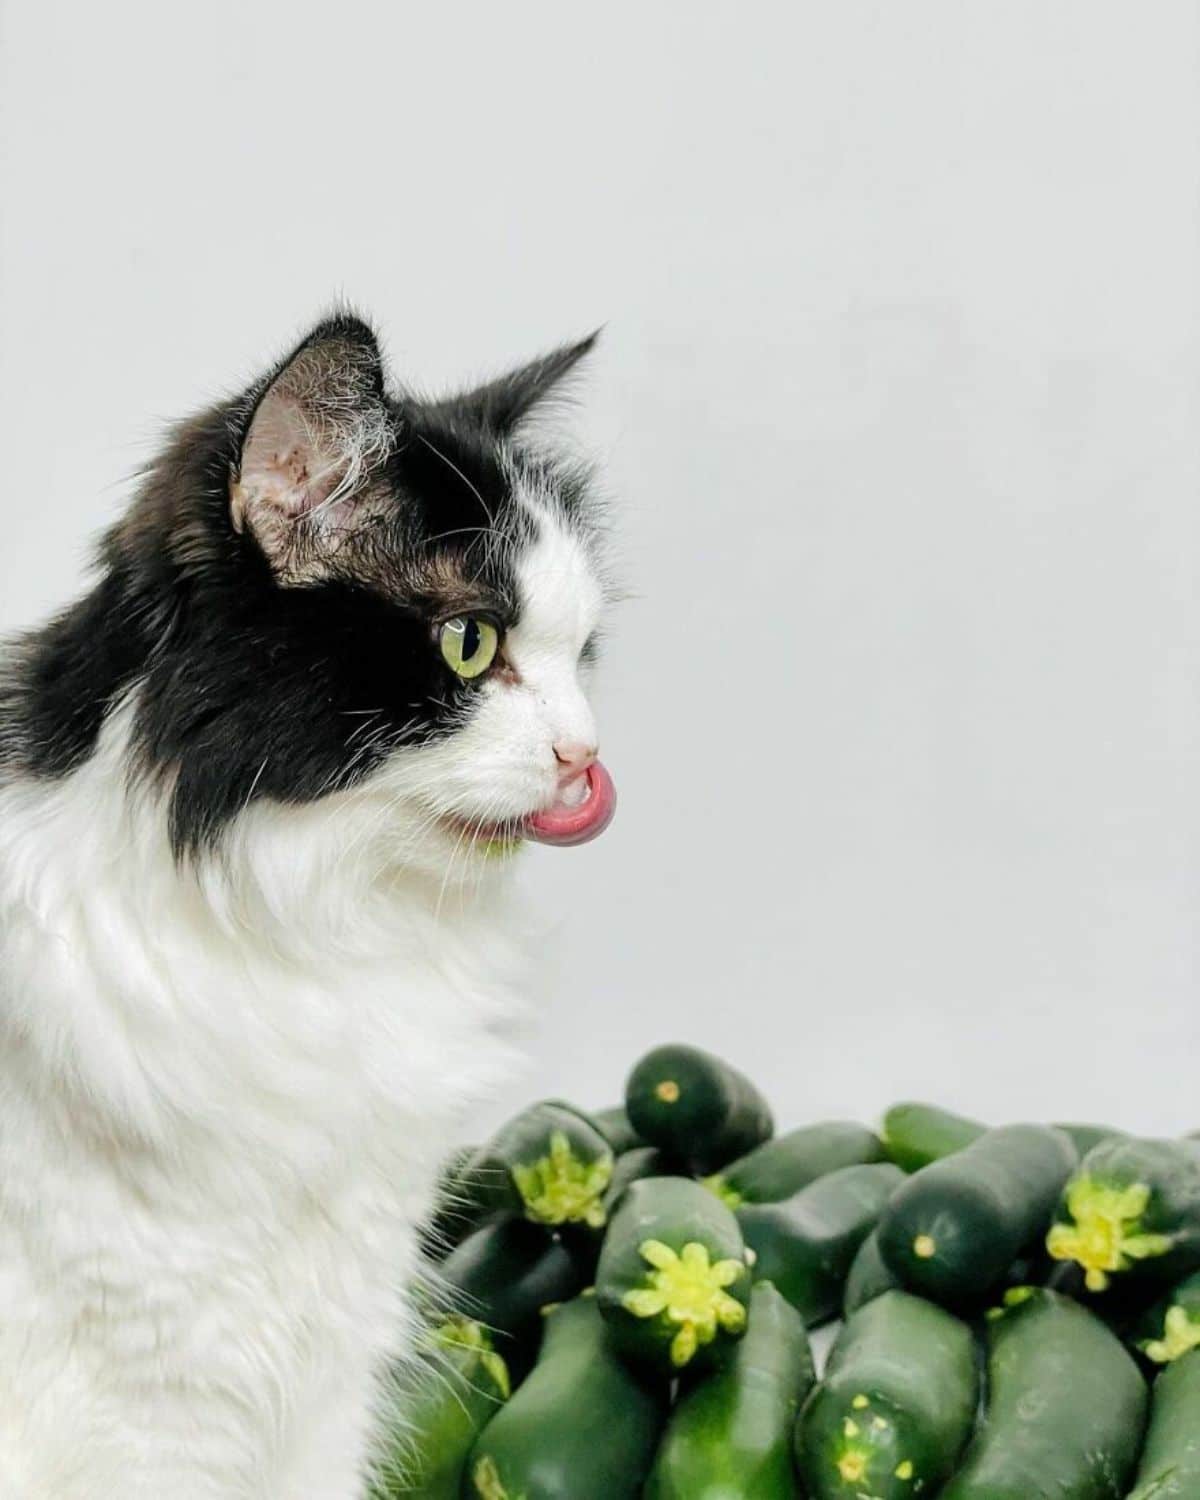 black and white fluffy cat sticking its tongue out next to a pile of courgettes